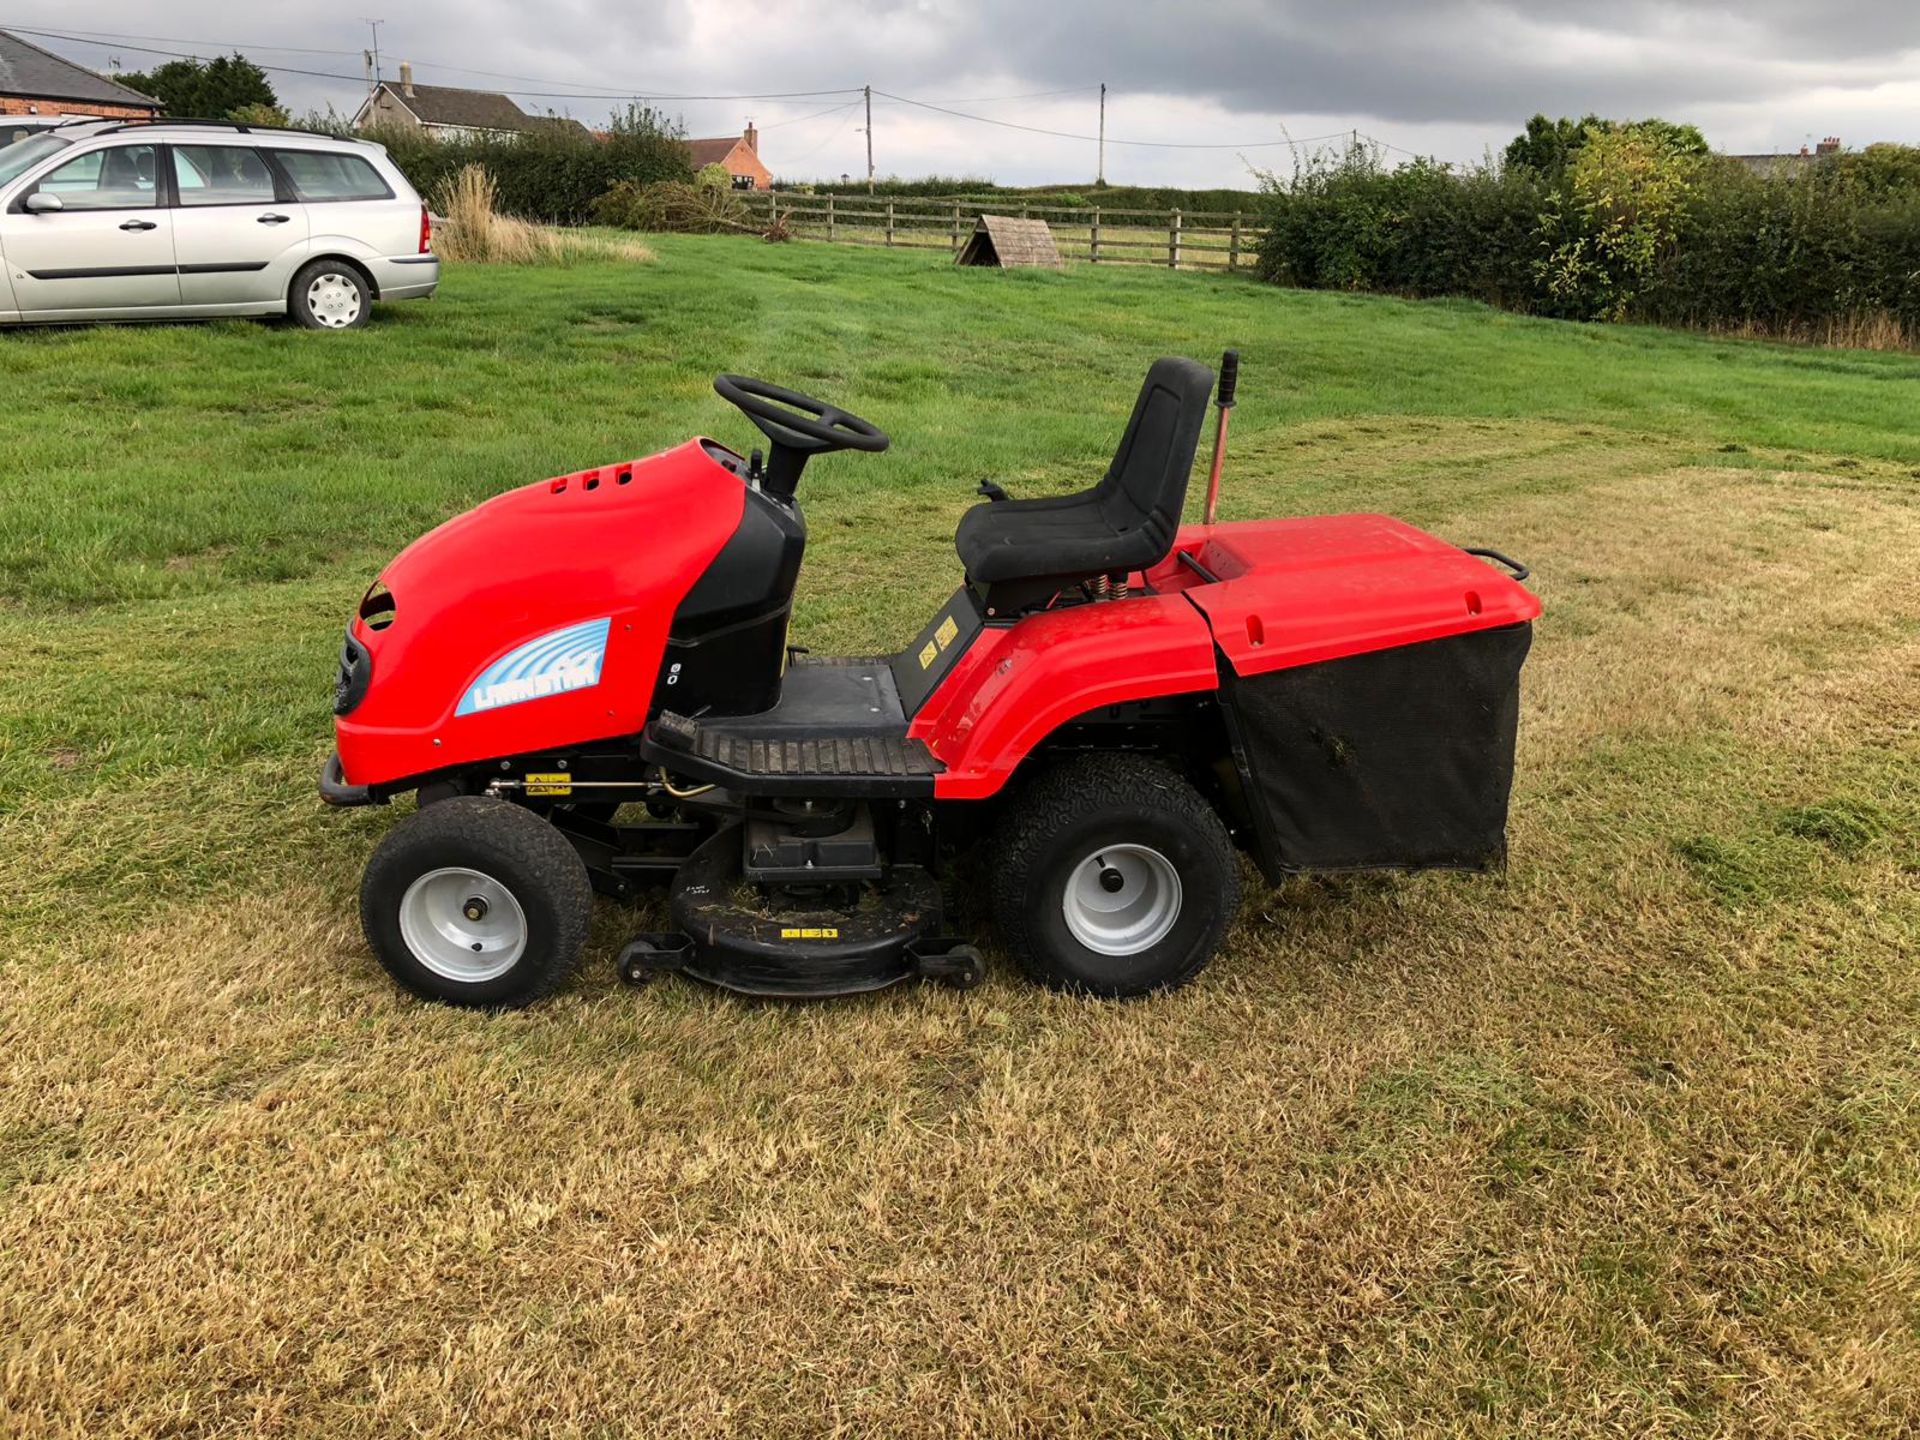 LAWNSTAR RIDE ON PETROL LAWN MOWER WITH REAR GRASS COLLECTOR, STARTS, RUNS AND CUTS *NO VAT* - Image 2 of 7